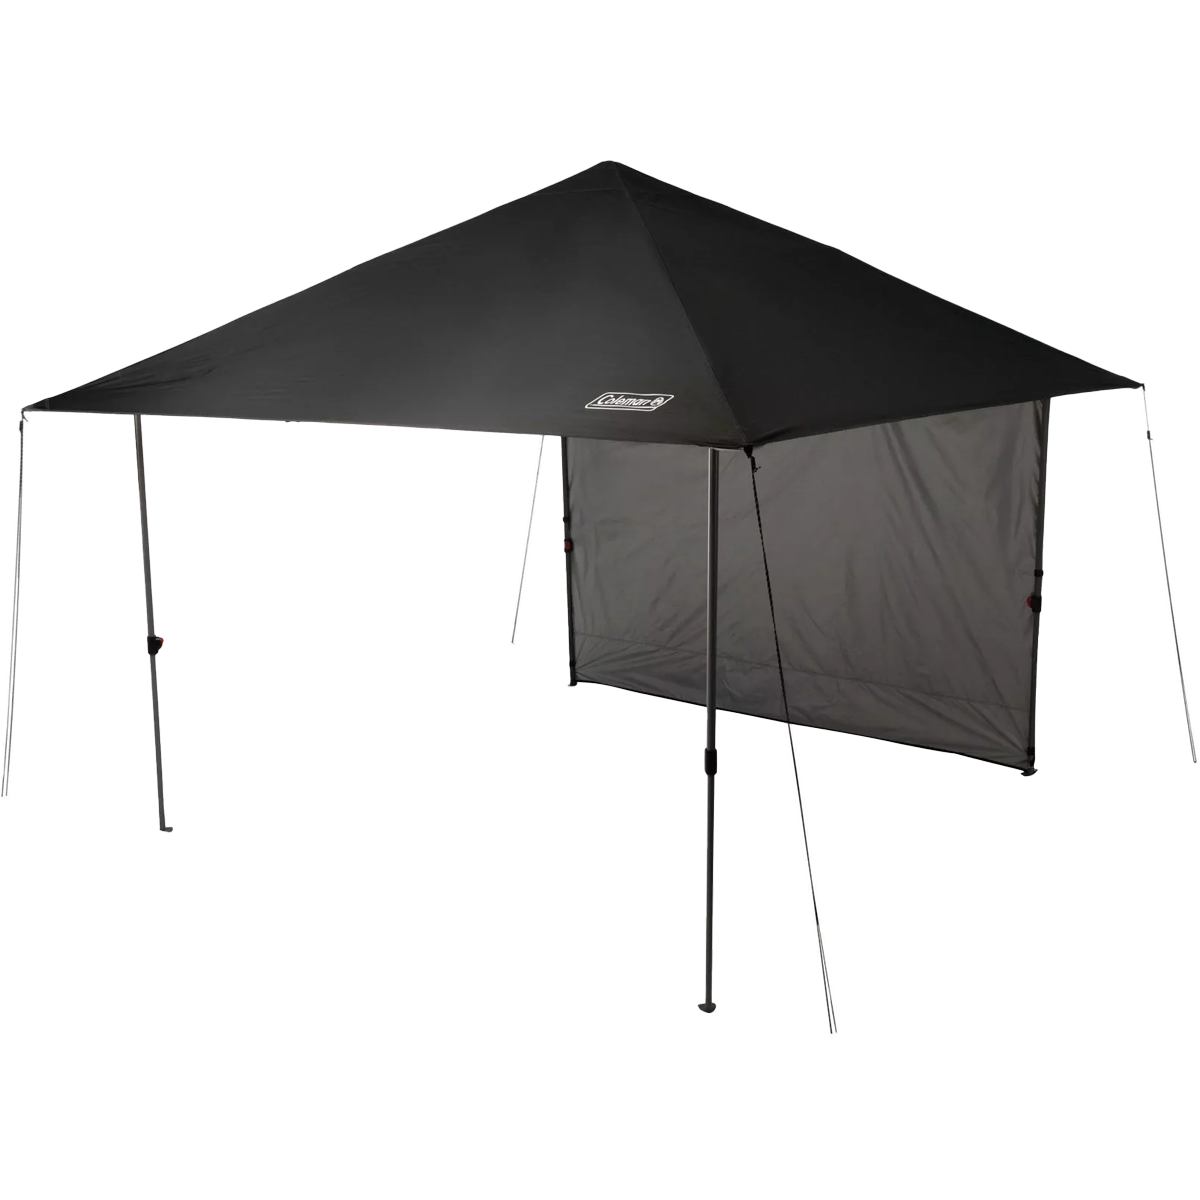 Oasis Lite Canopy 10 x 10 Onepeak with Sun Wall alternate view